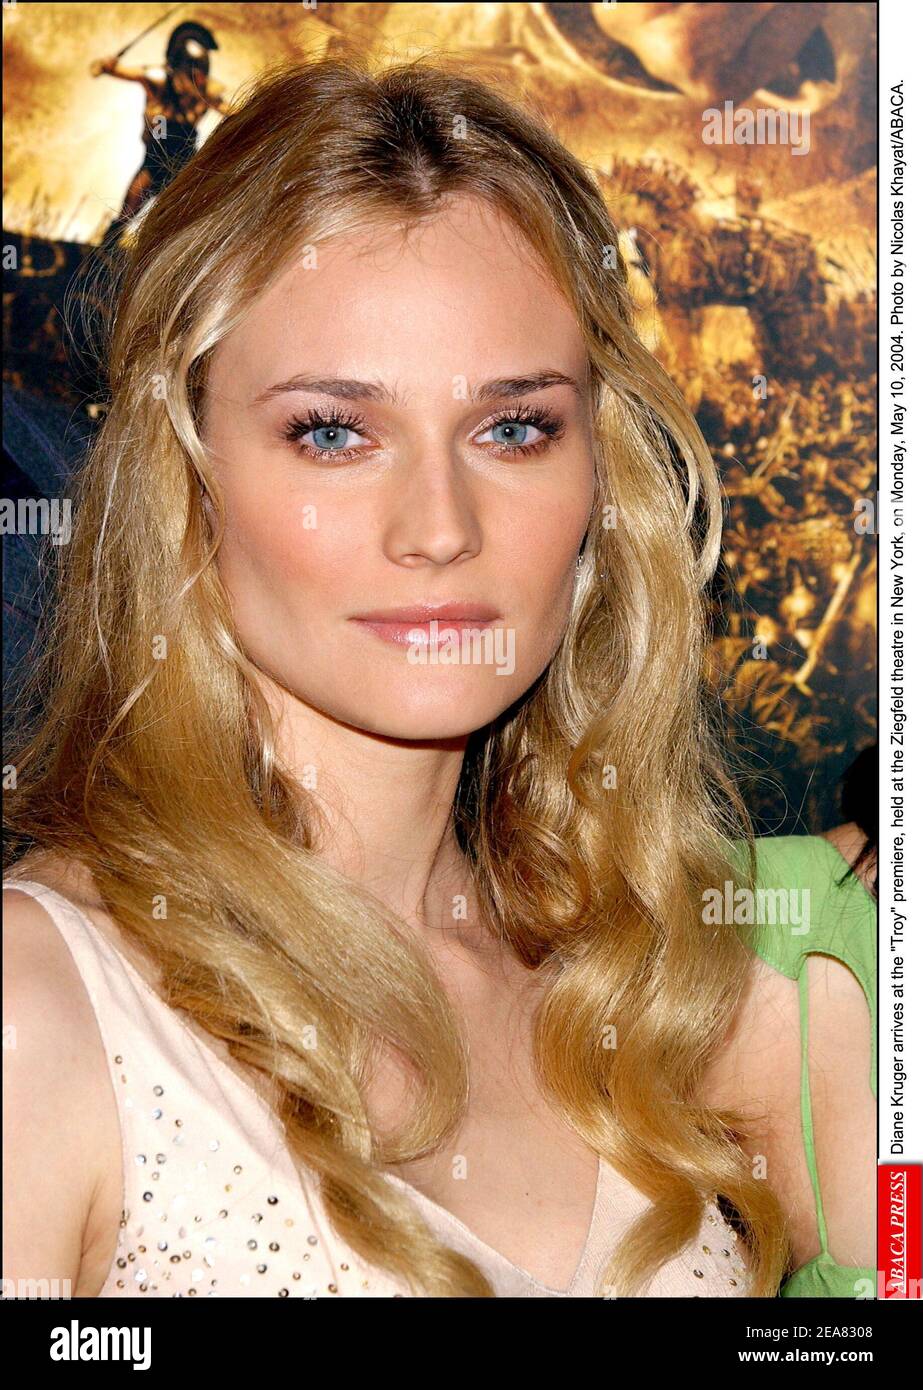 Diane Kruger arrives at the Troy premiere, held at the Ziegfeld theatre in New York, on Monday, May 10, 2004. Photo by Nicolas Khayat/ABACA. Stock Photo